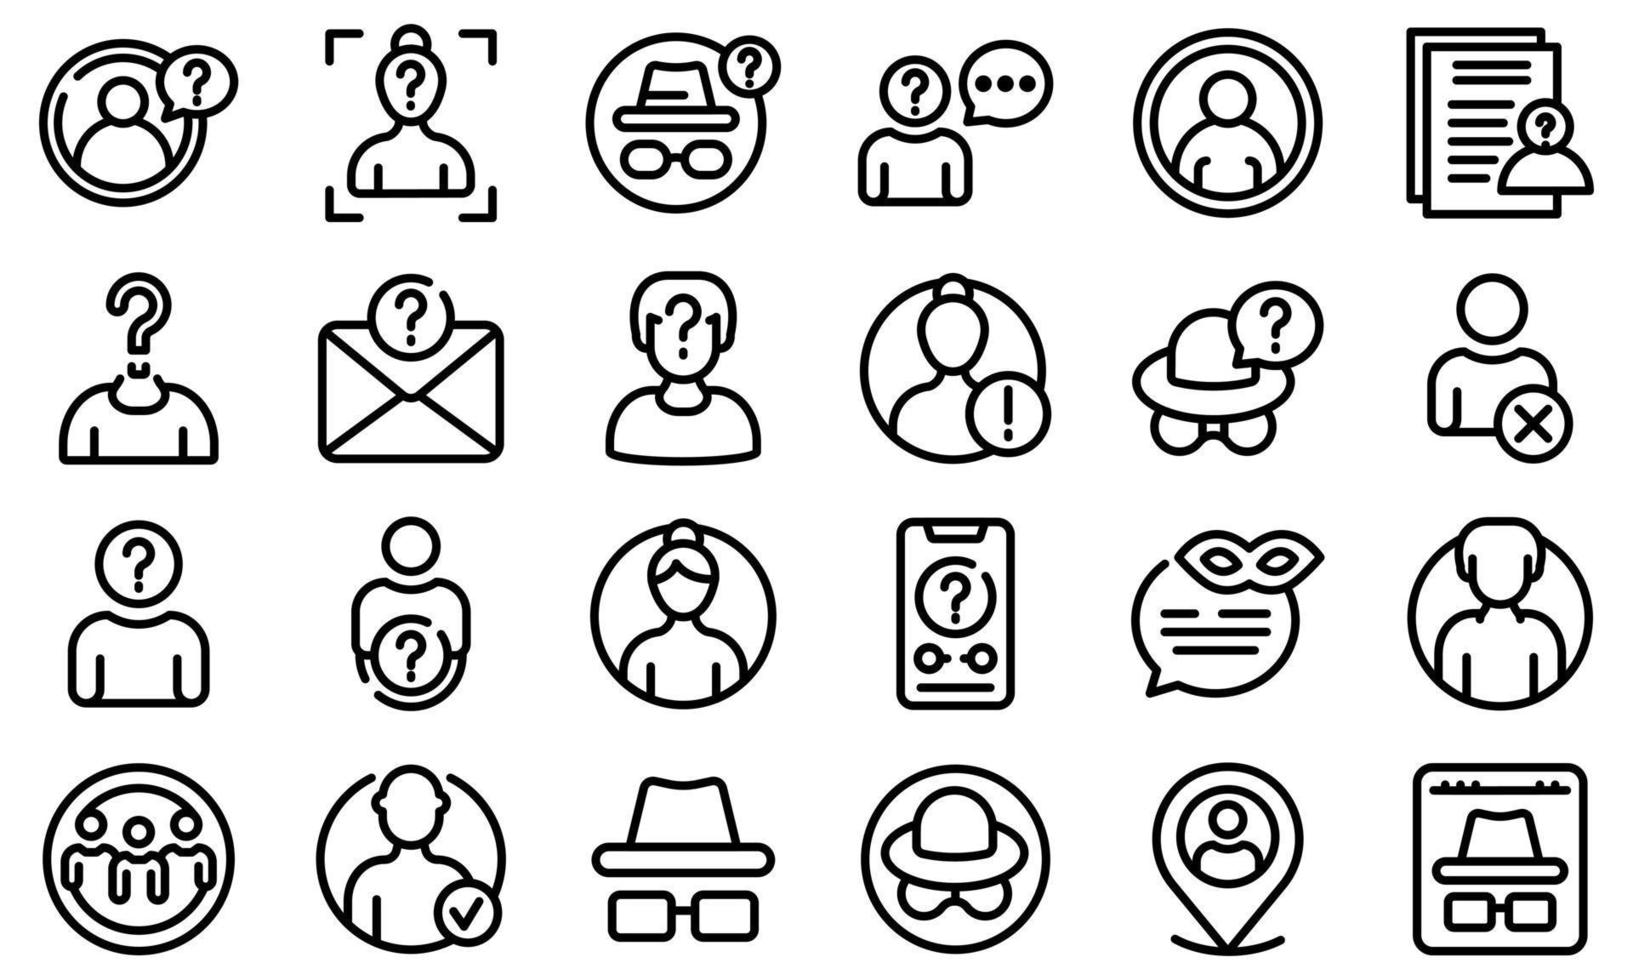 Anonymous icons set, outline style vector